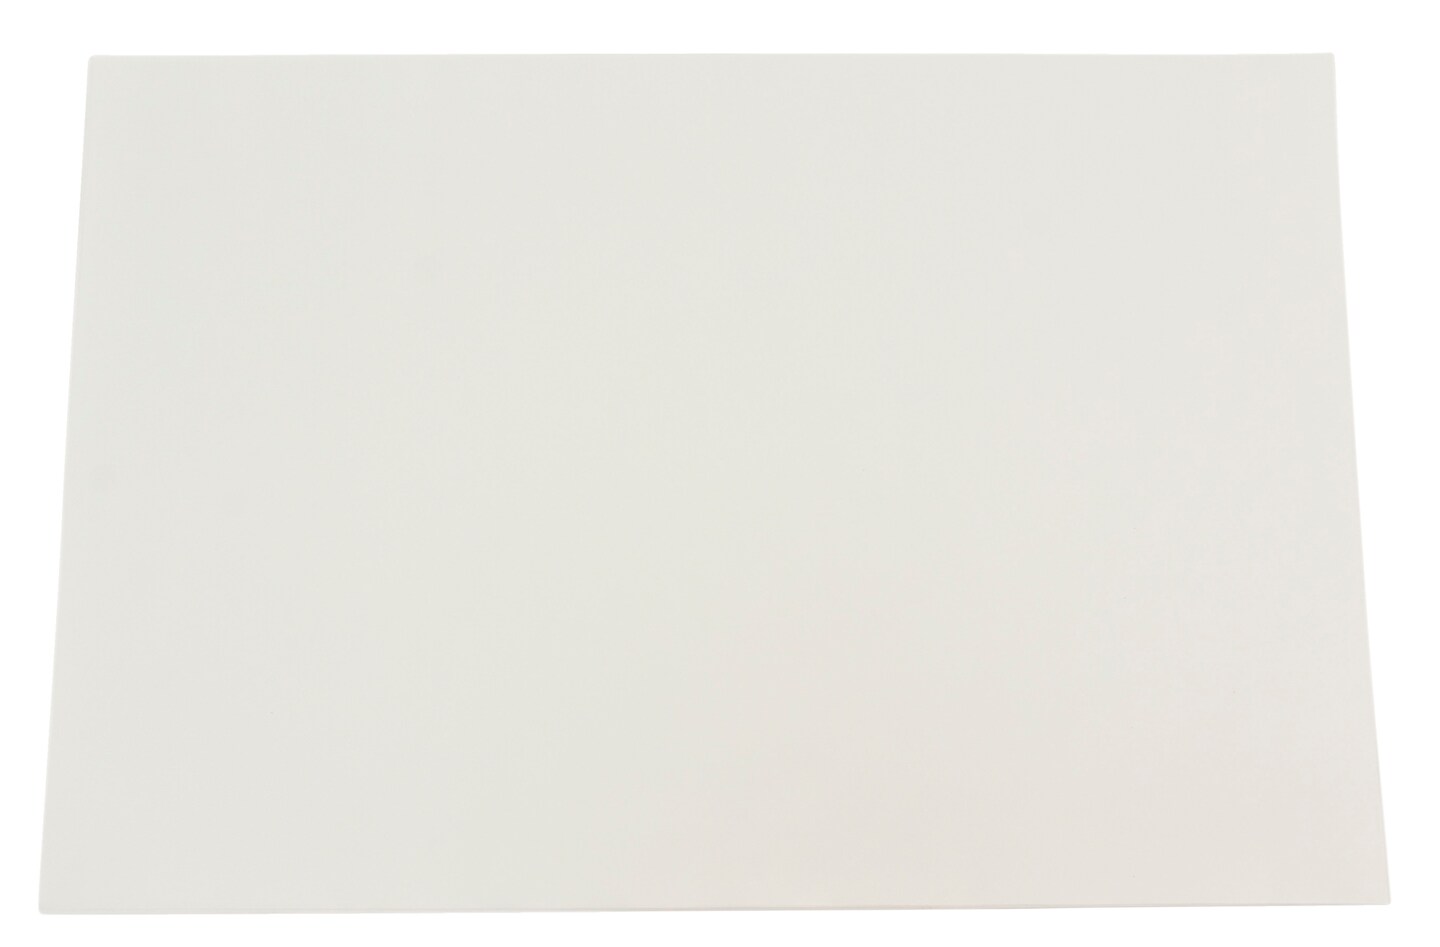 Sax Sulphite Drawing Paper, 80 lb, 24 x 36 Inches, Extra-White, Pack of 250